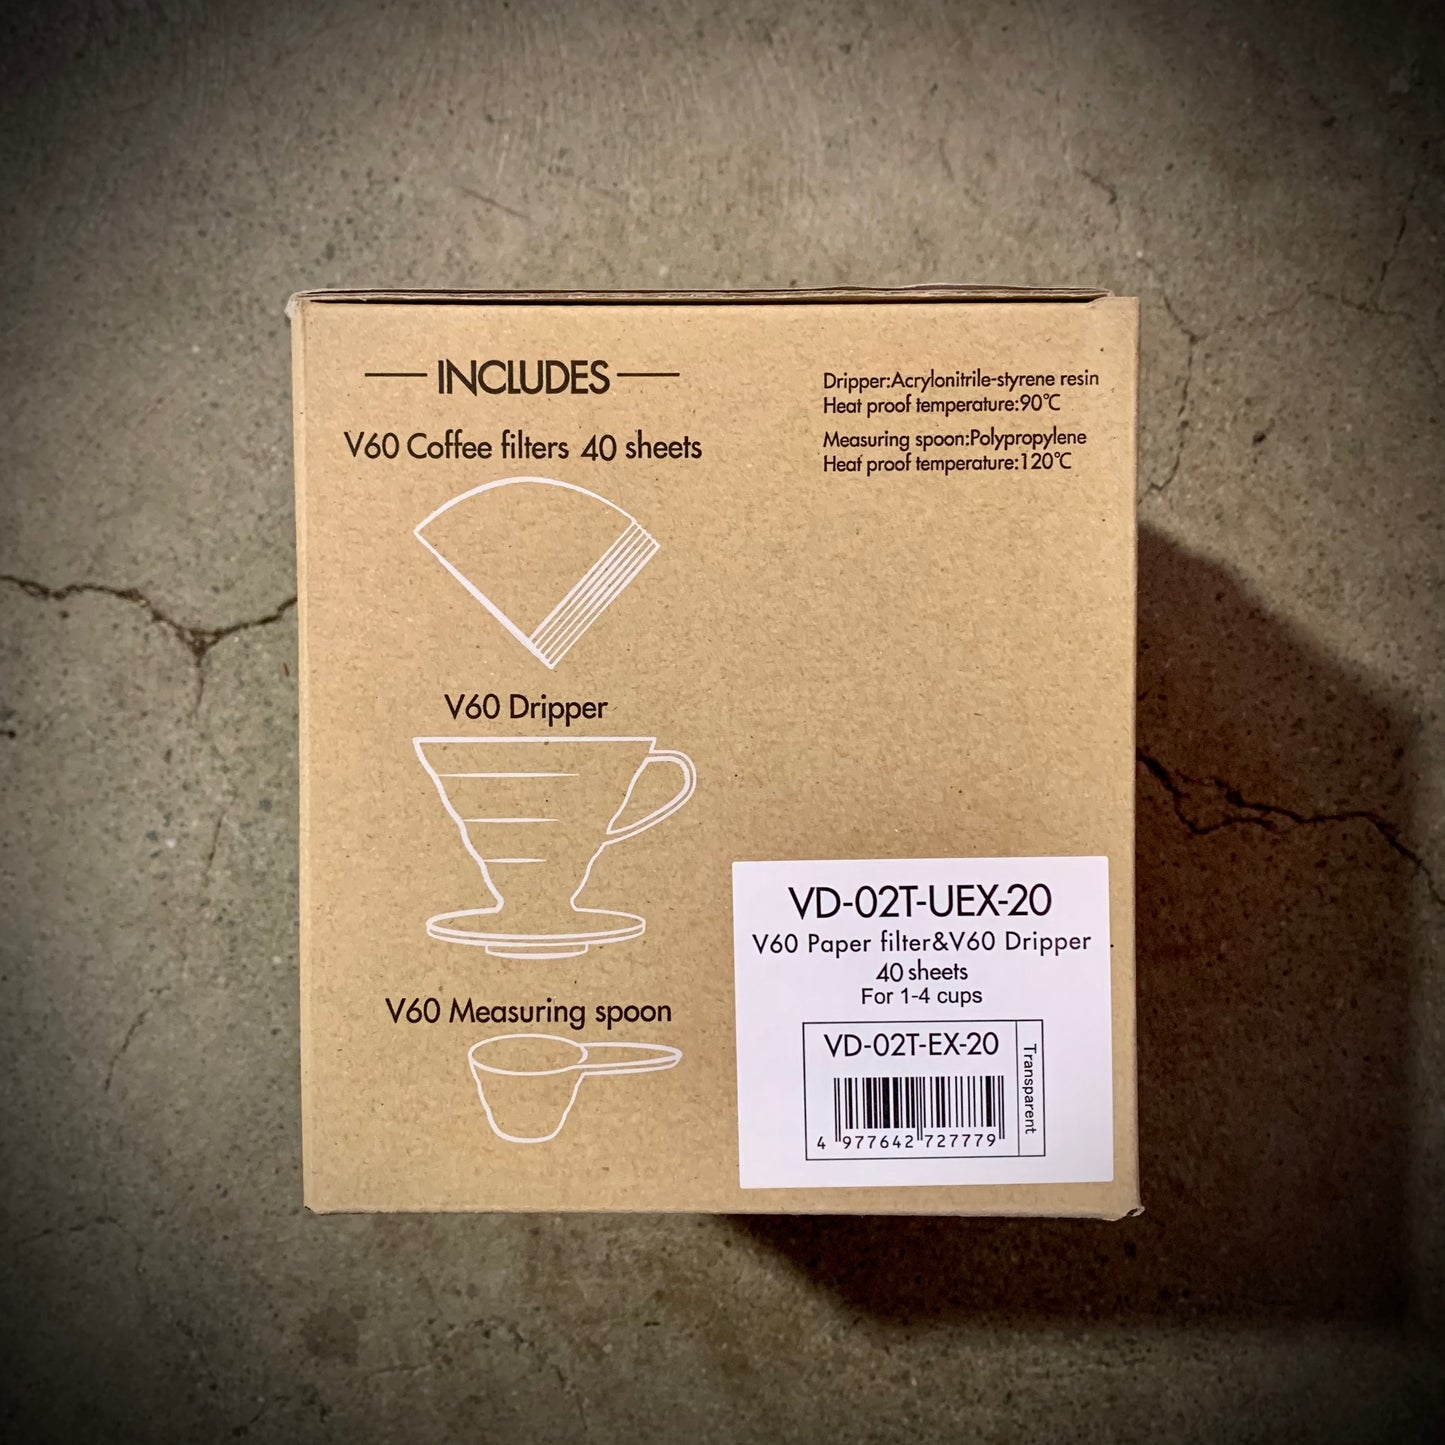 Hario V60 coffee dripper with filters